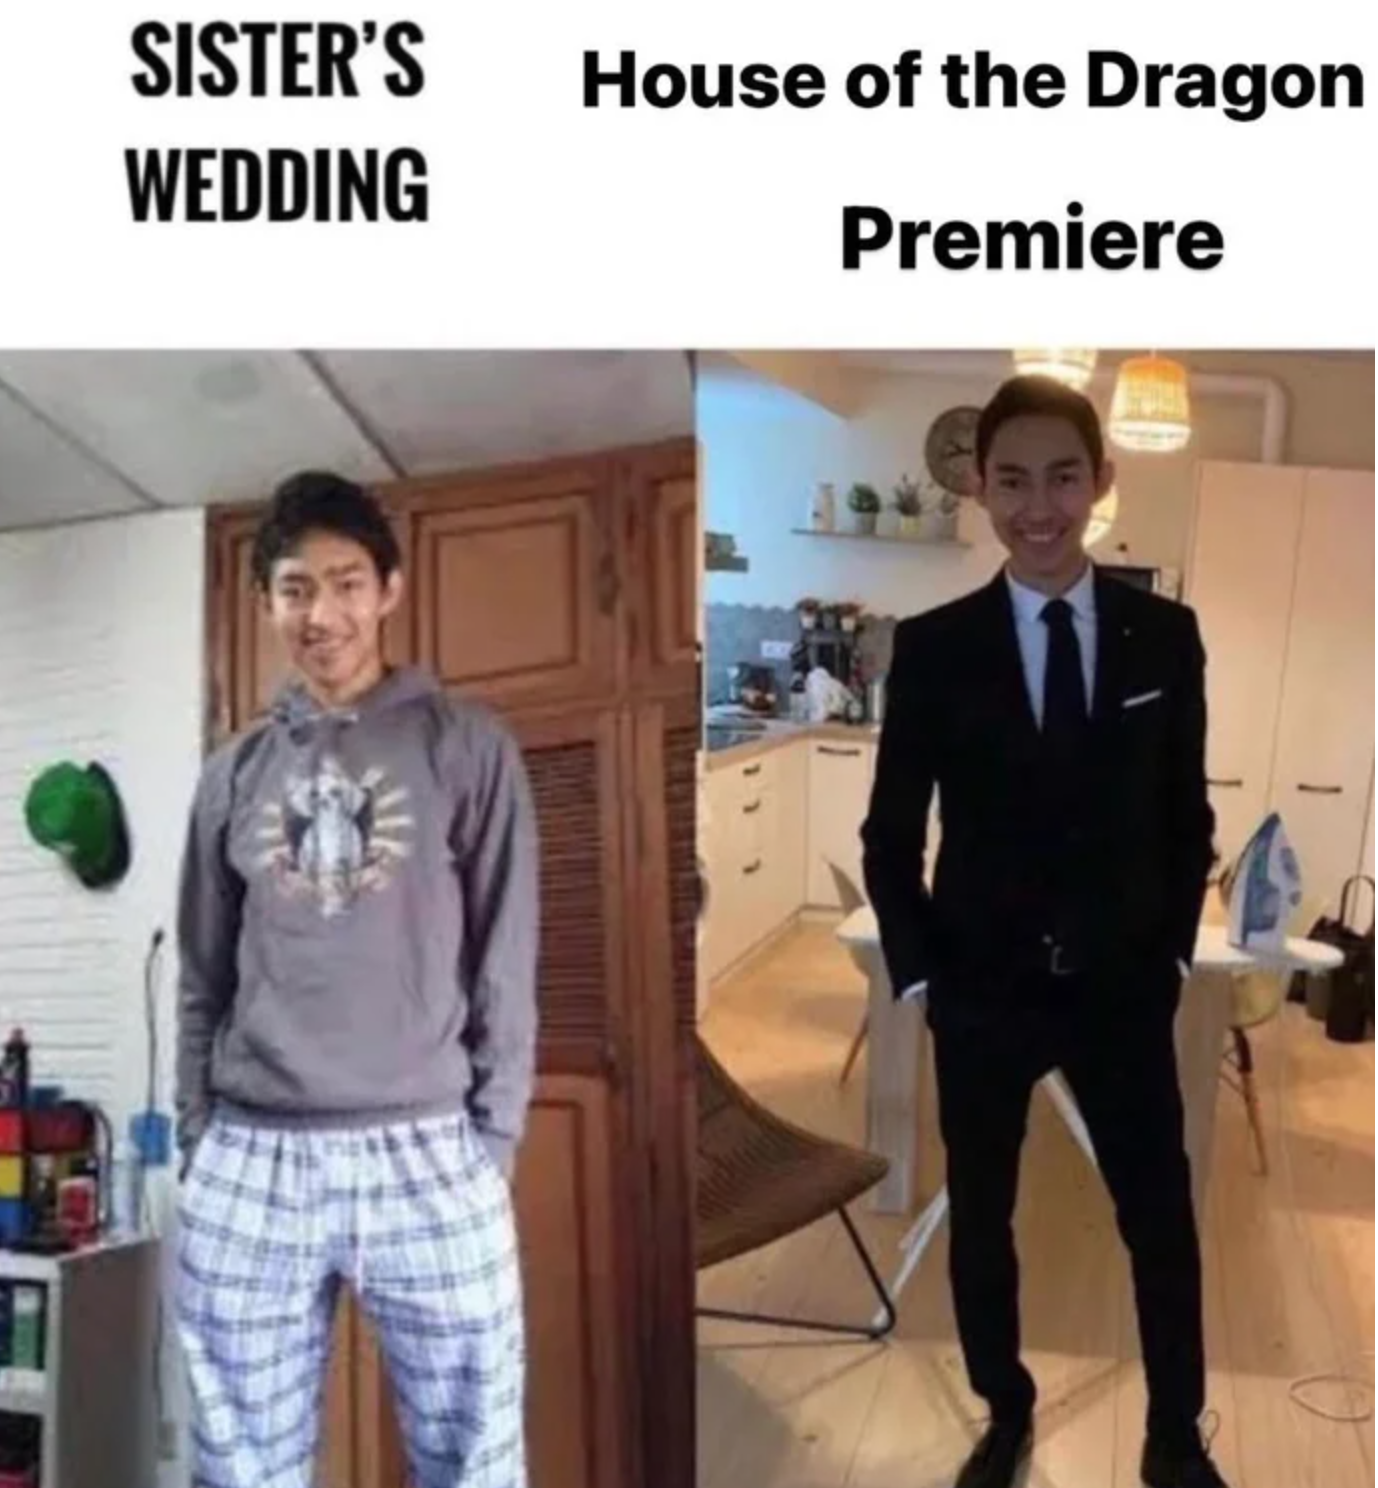 Sister'S Wedding House of the Dragon Premiere